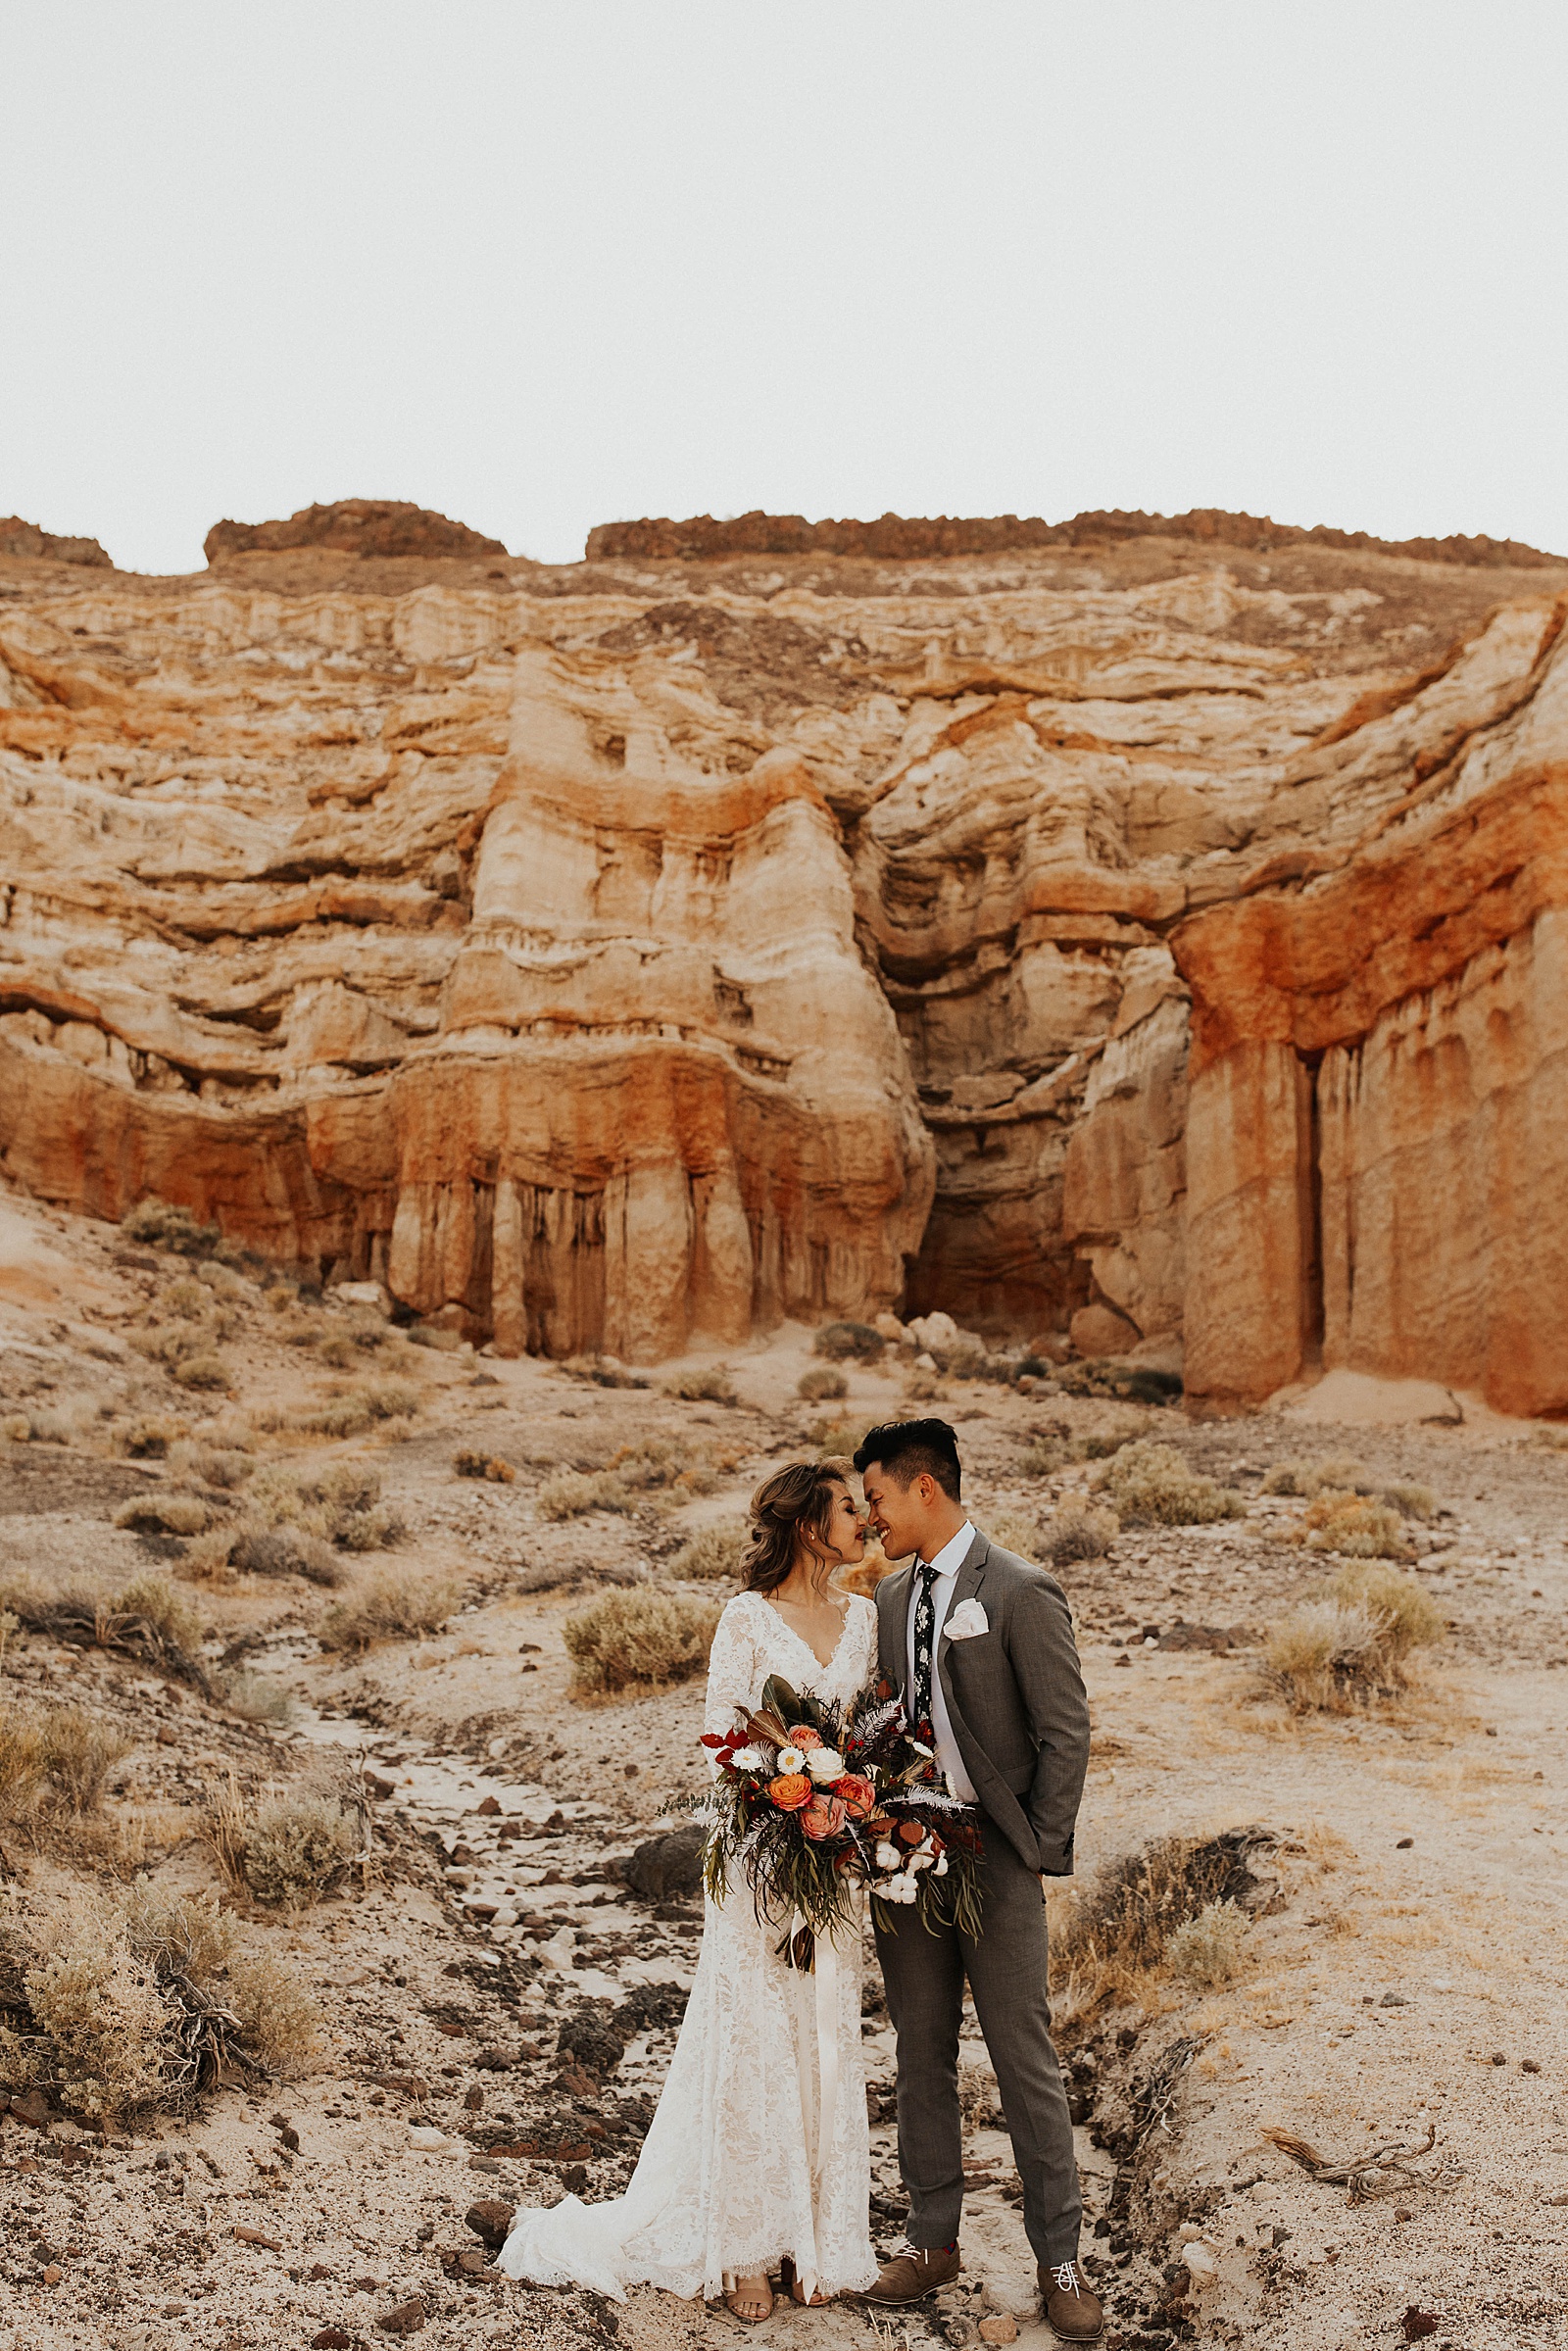 A bride and groom photo at the Red Rock Canyon in California.